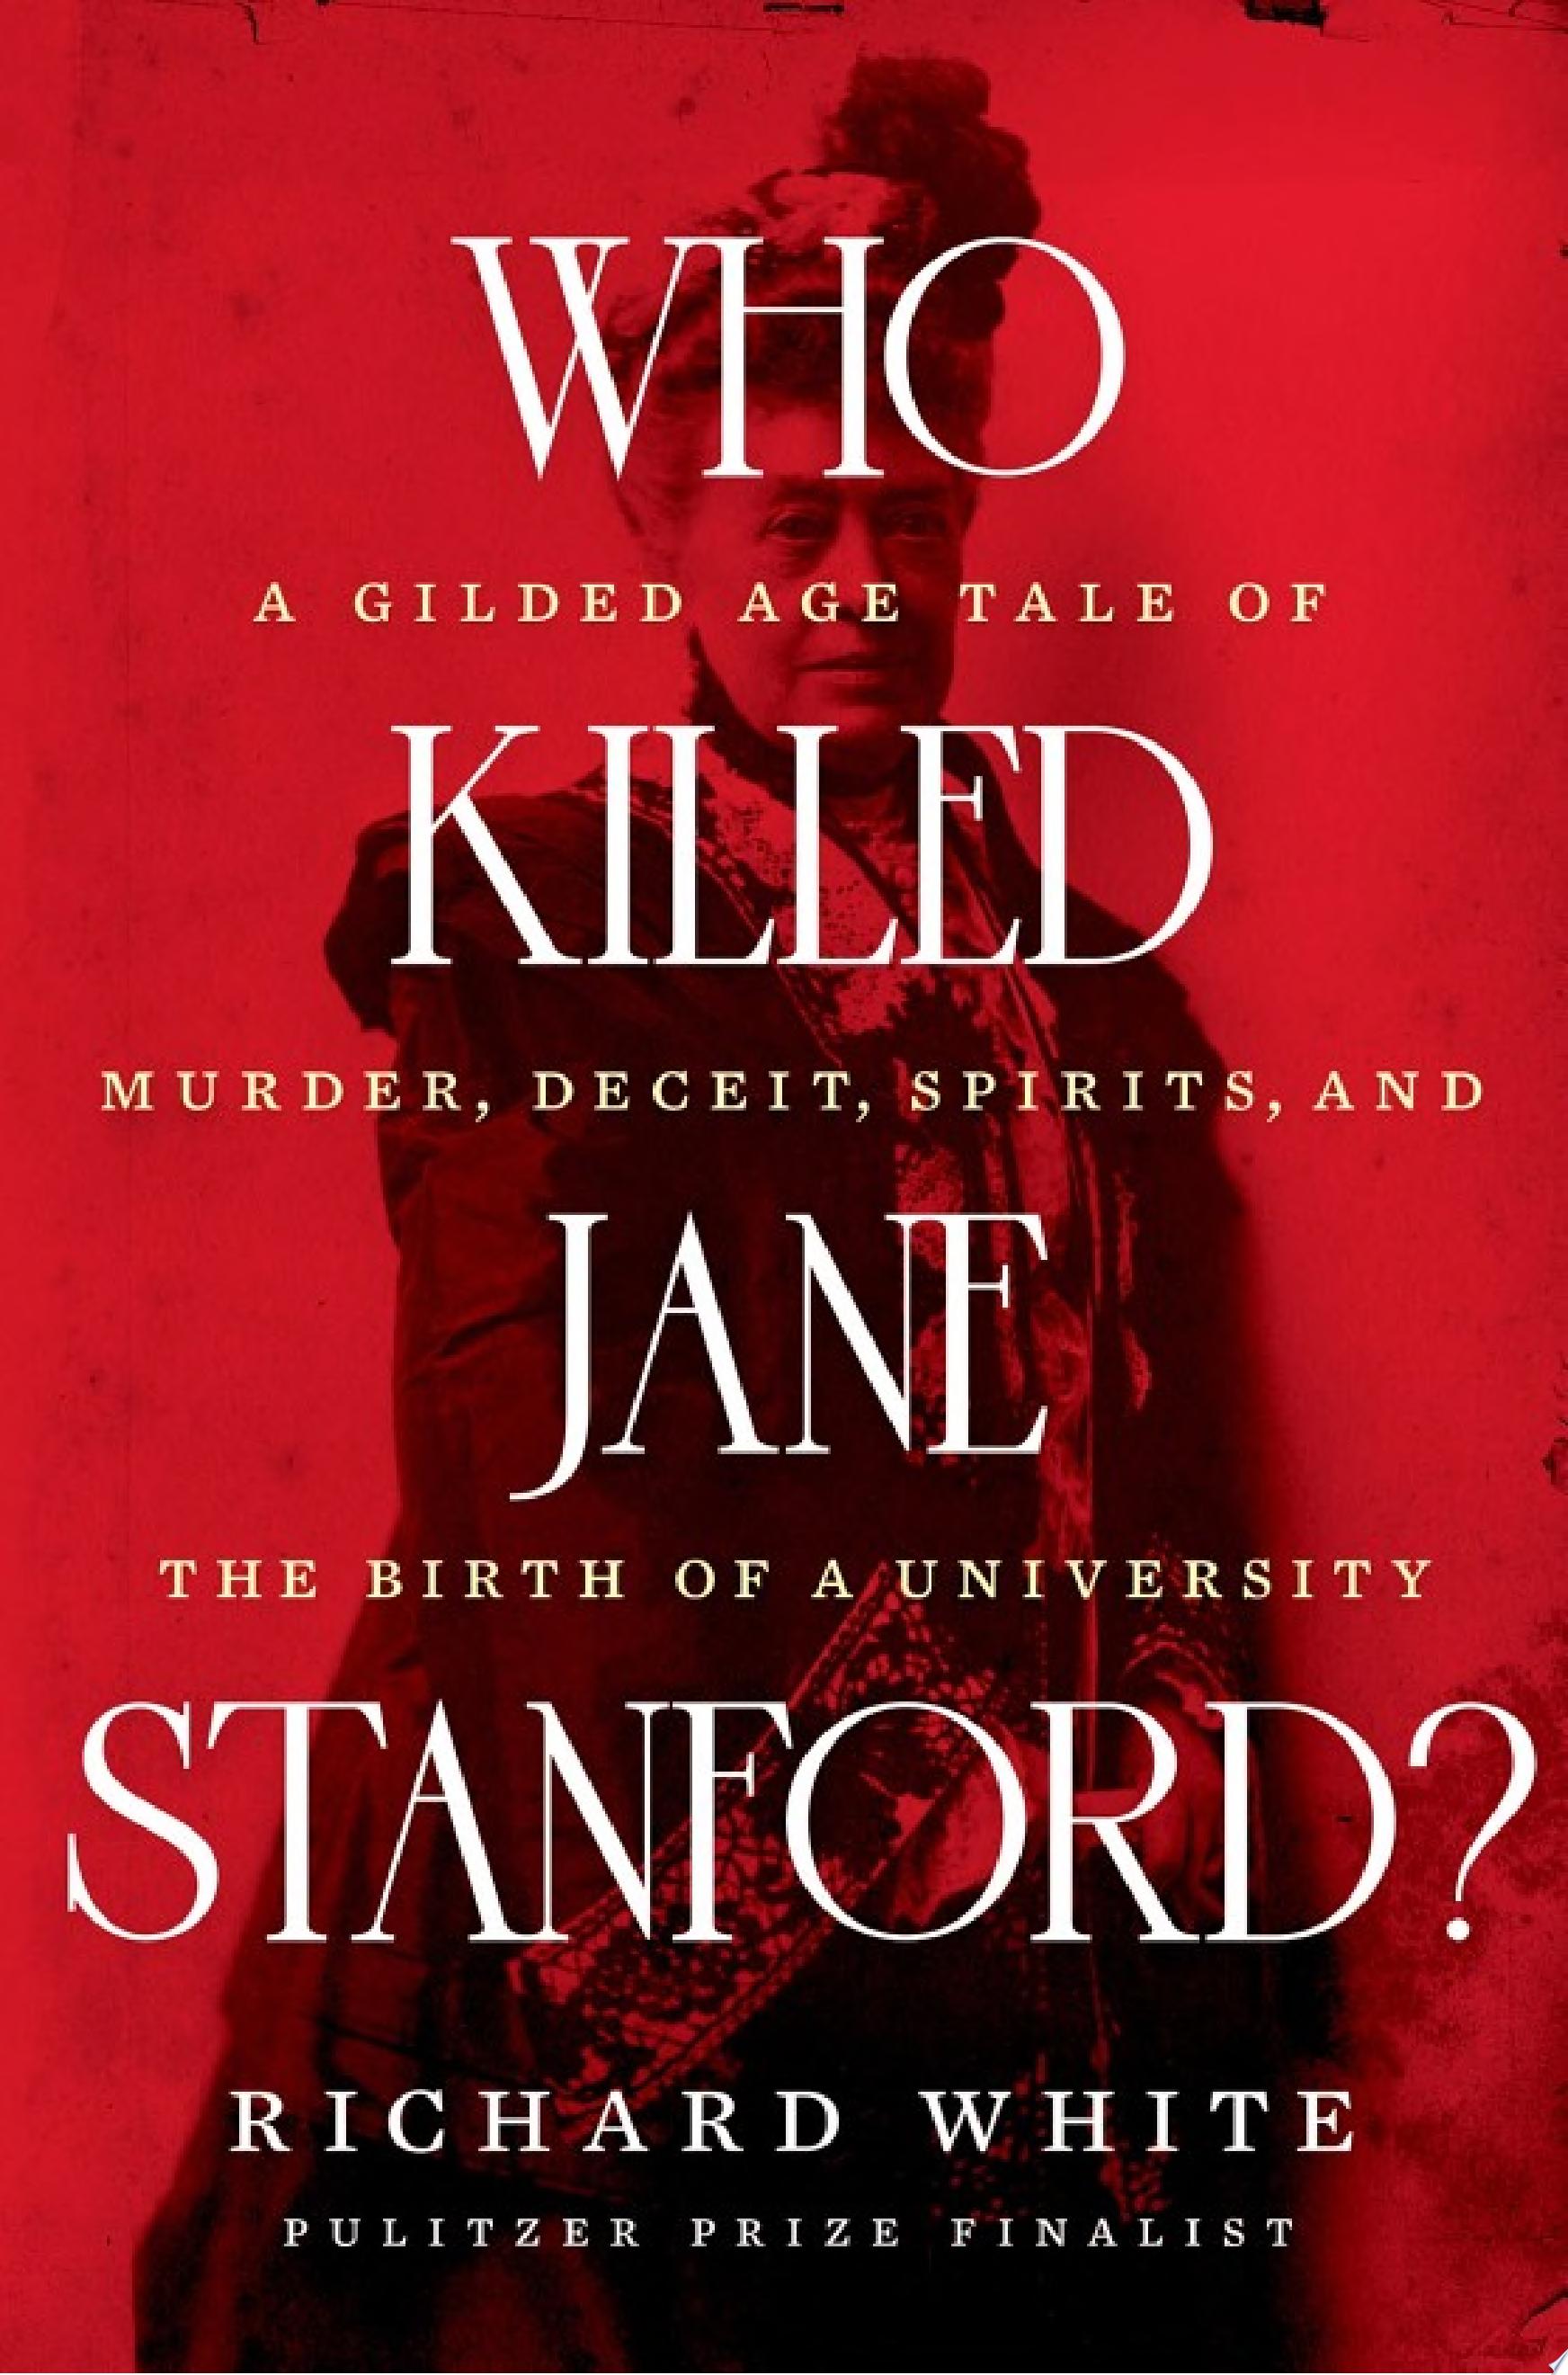 Image for "Who Killed Jane Stanford?: A Gilded Age Tale of Murder, Deceit, Spirits and the Birth of a University"